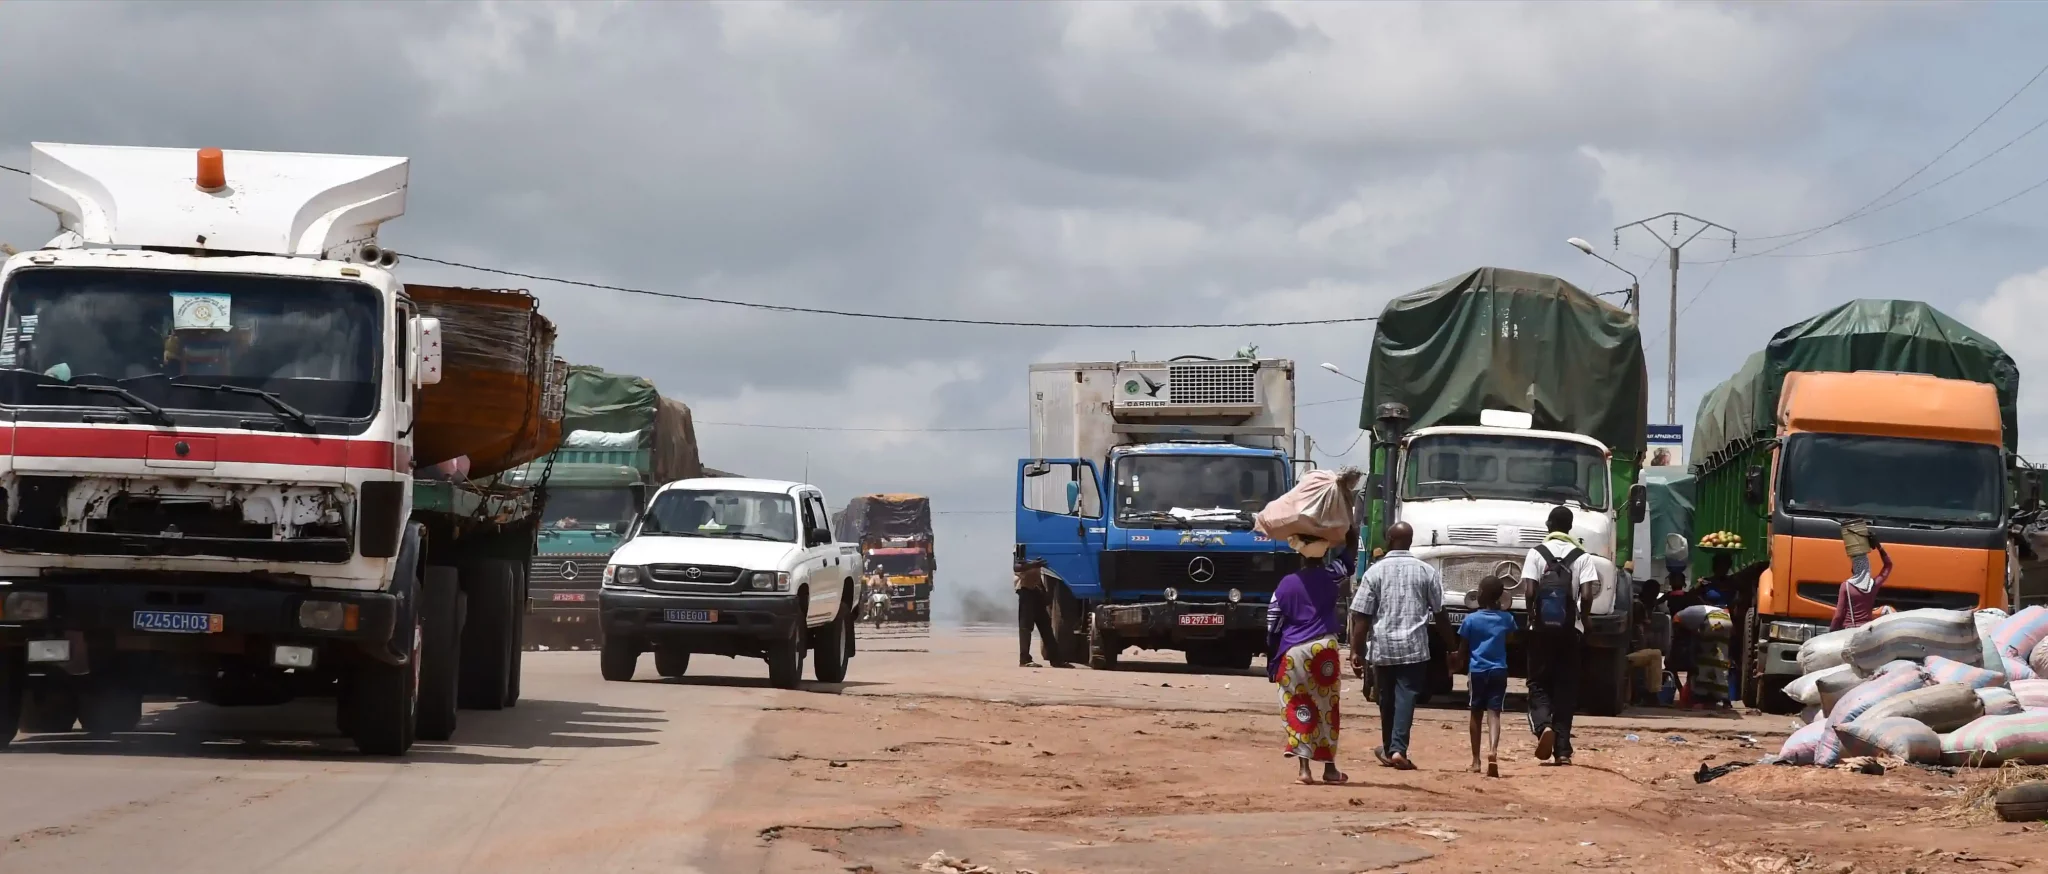 Trucks loaded with various goods bound for Burkina Faso and Niger from Côte d'Ivoire.